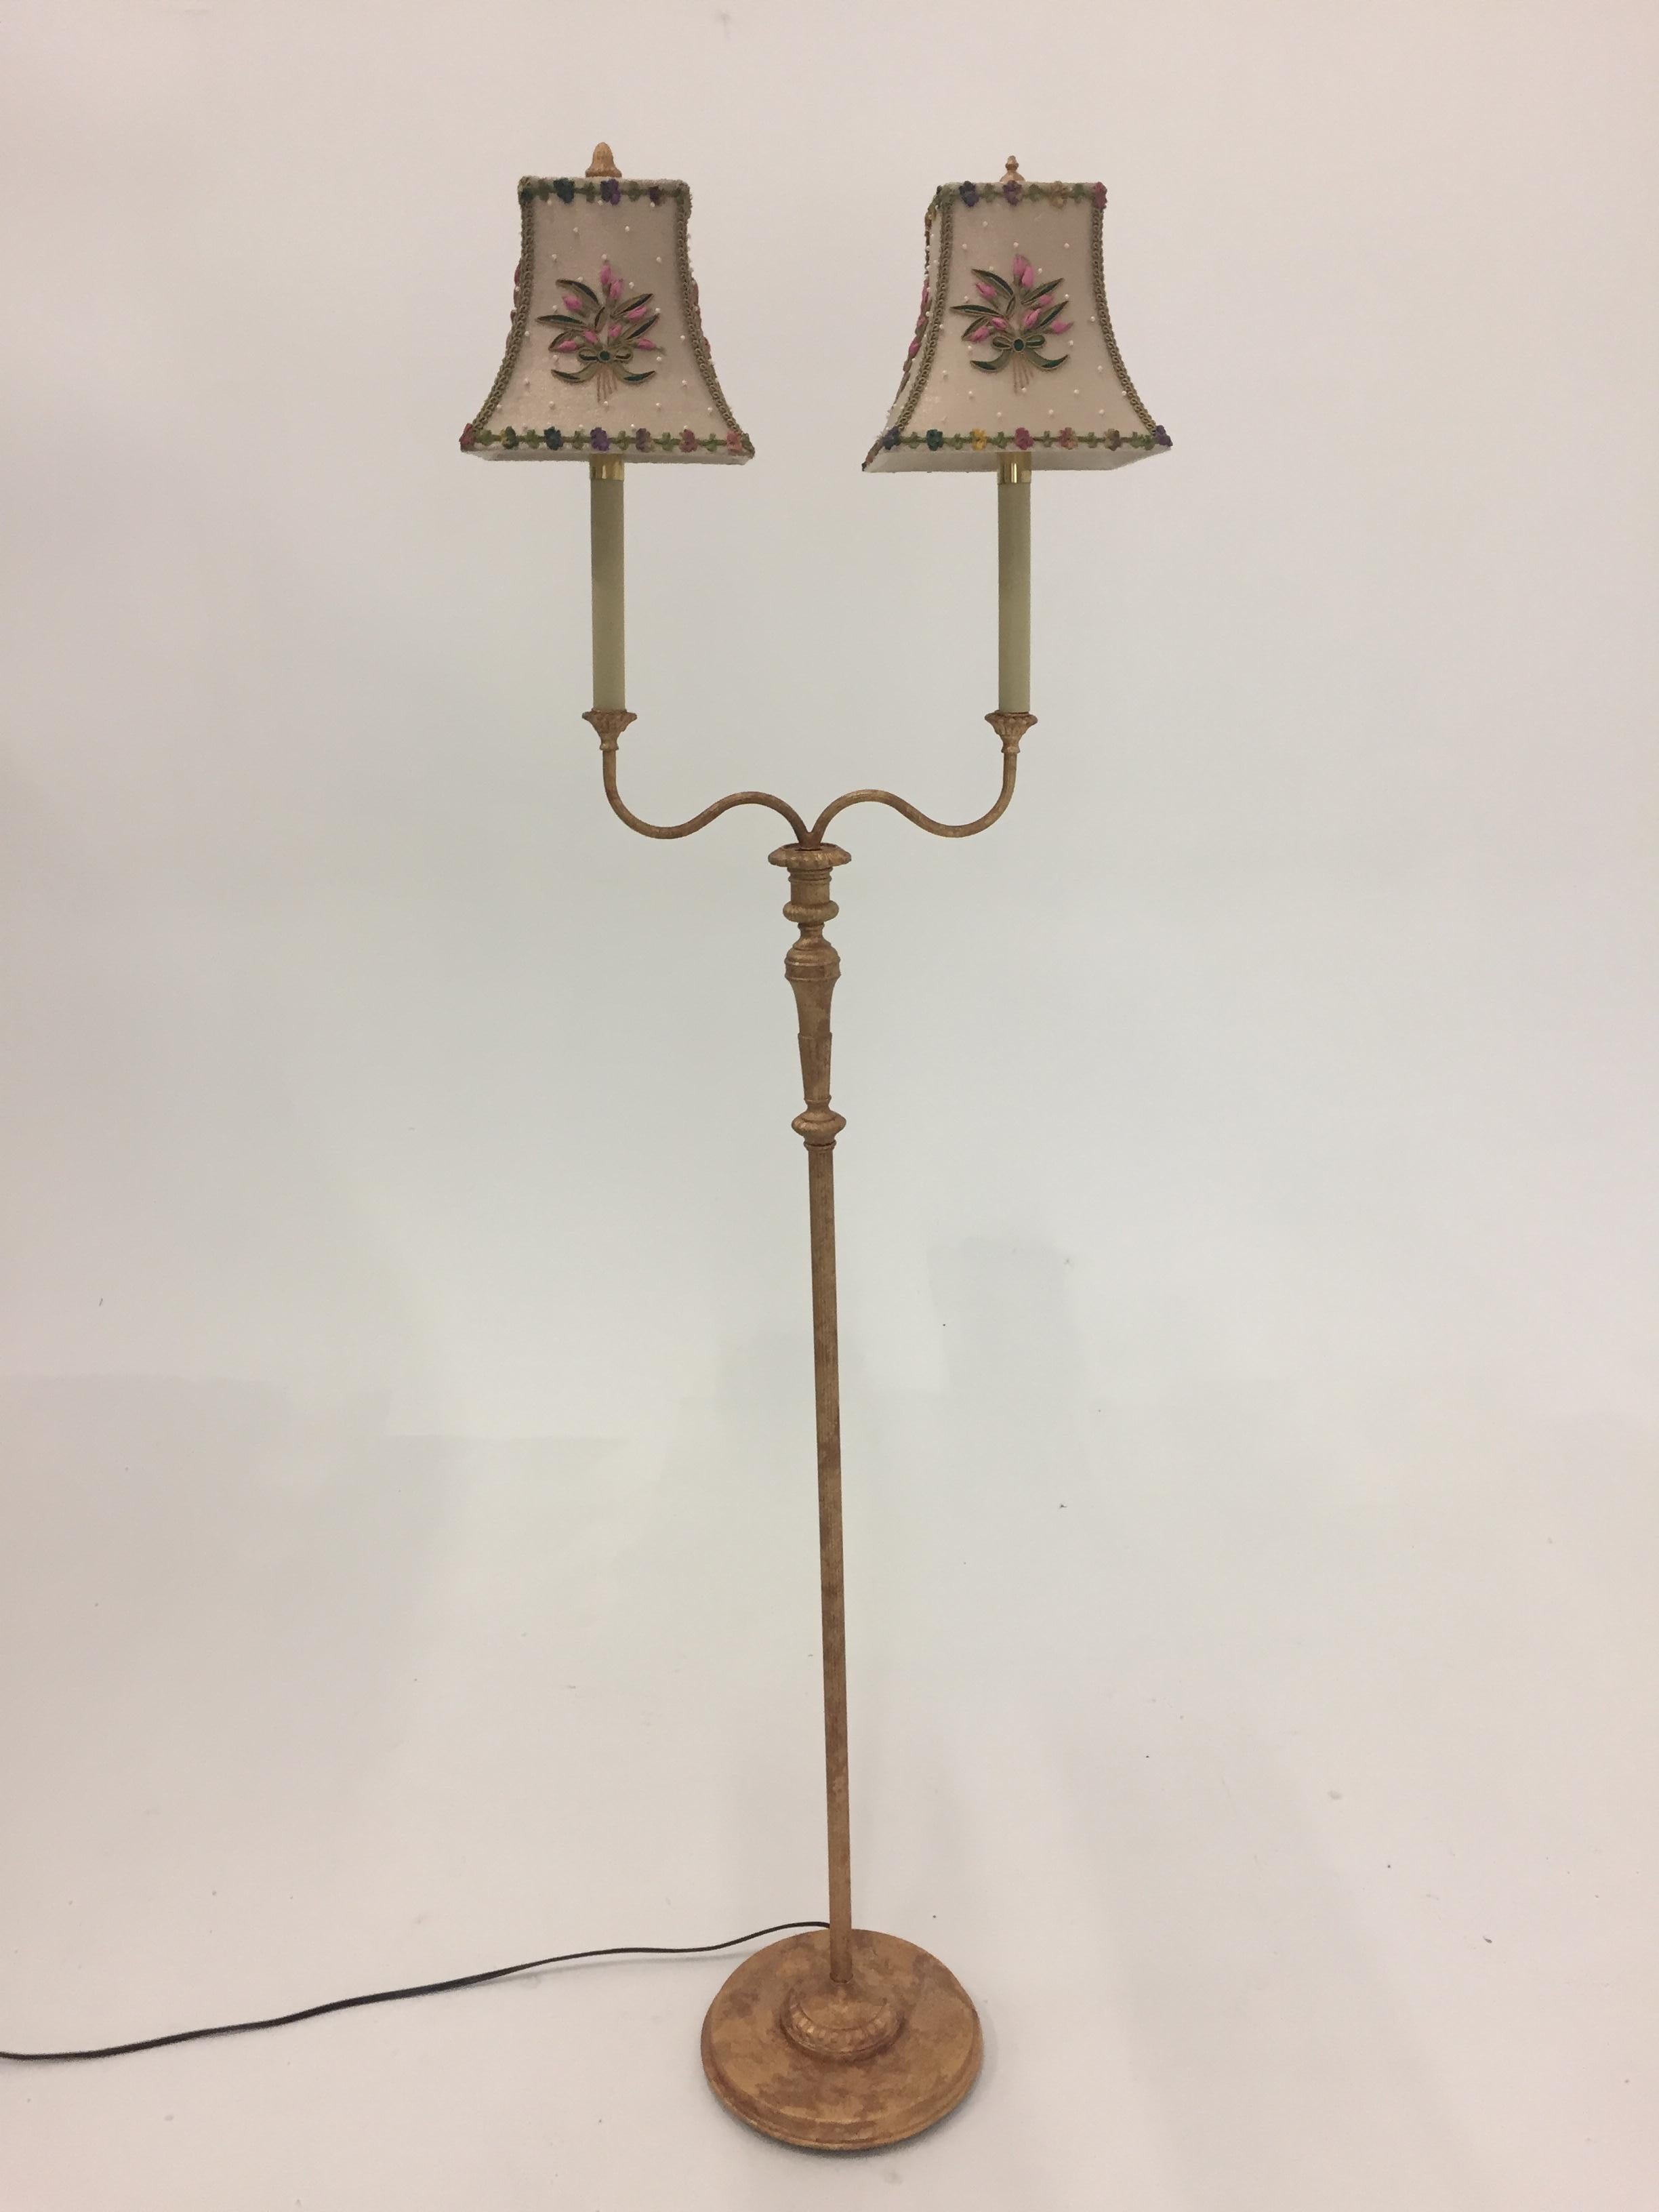 An elegant gilt metal designer floor lamp having round base and two candlestick arms, with very pretty custom hand embroidered shades.
By Raymond Waites for Tyndale